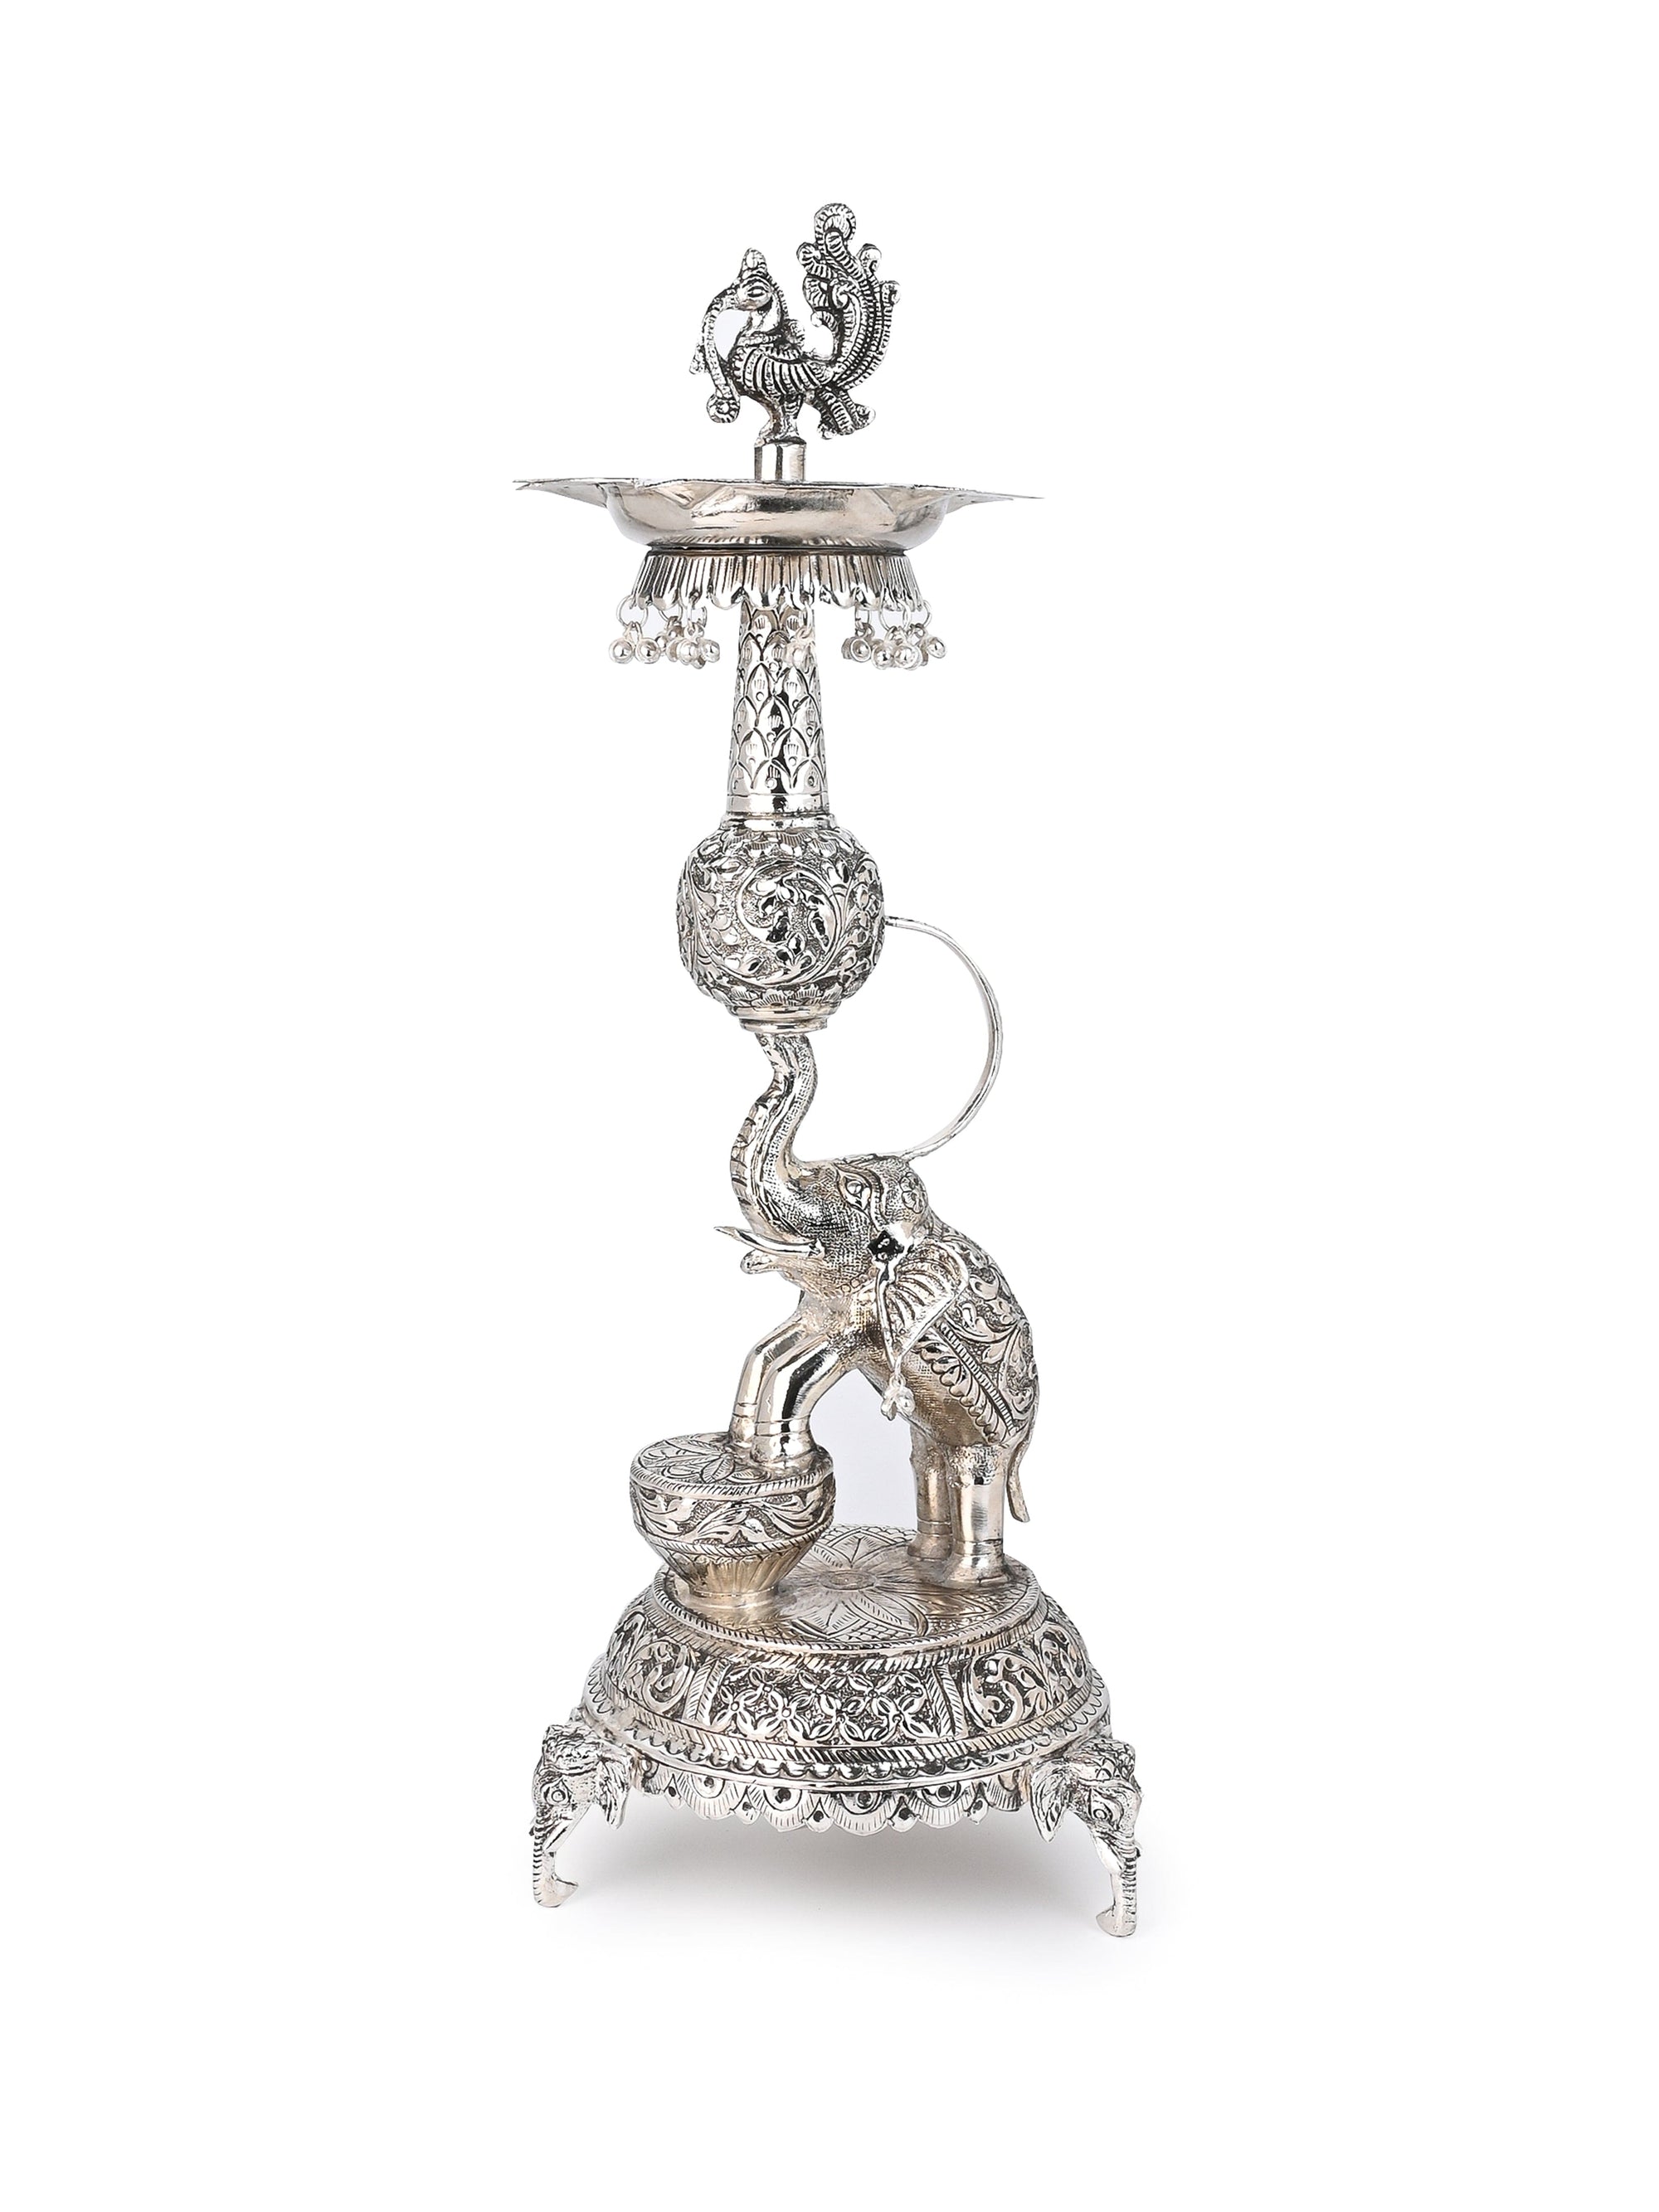 Antique Finish Oxidized Silver Traditional Lamp / Samai for Puja Rituals - 18 inches